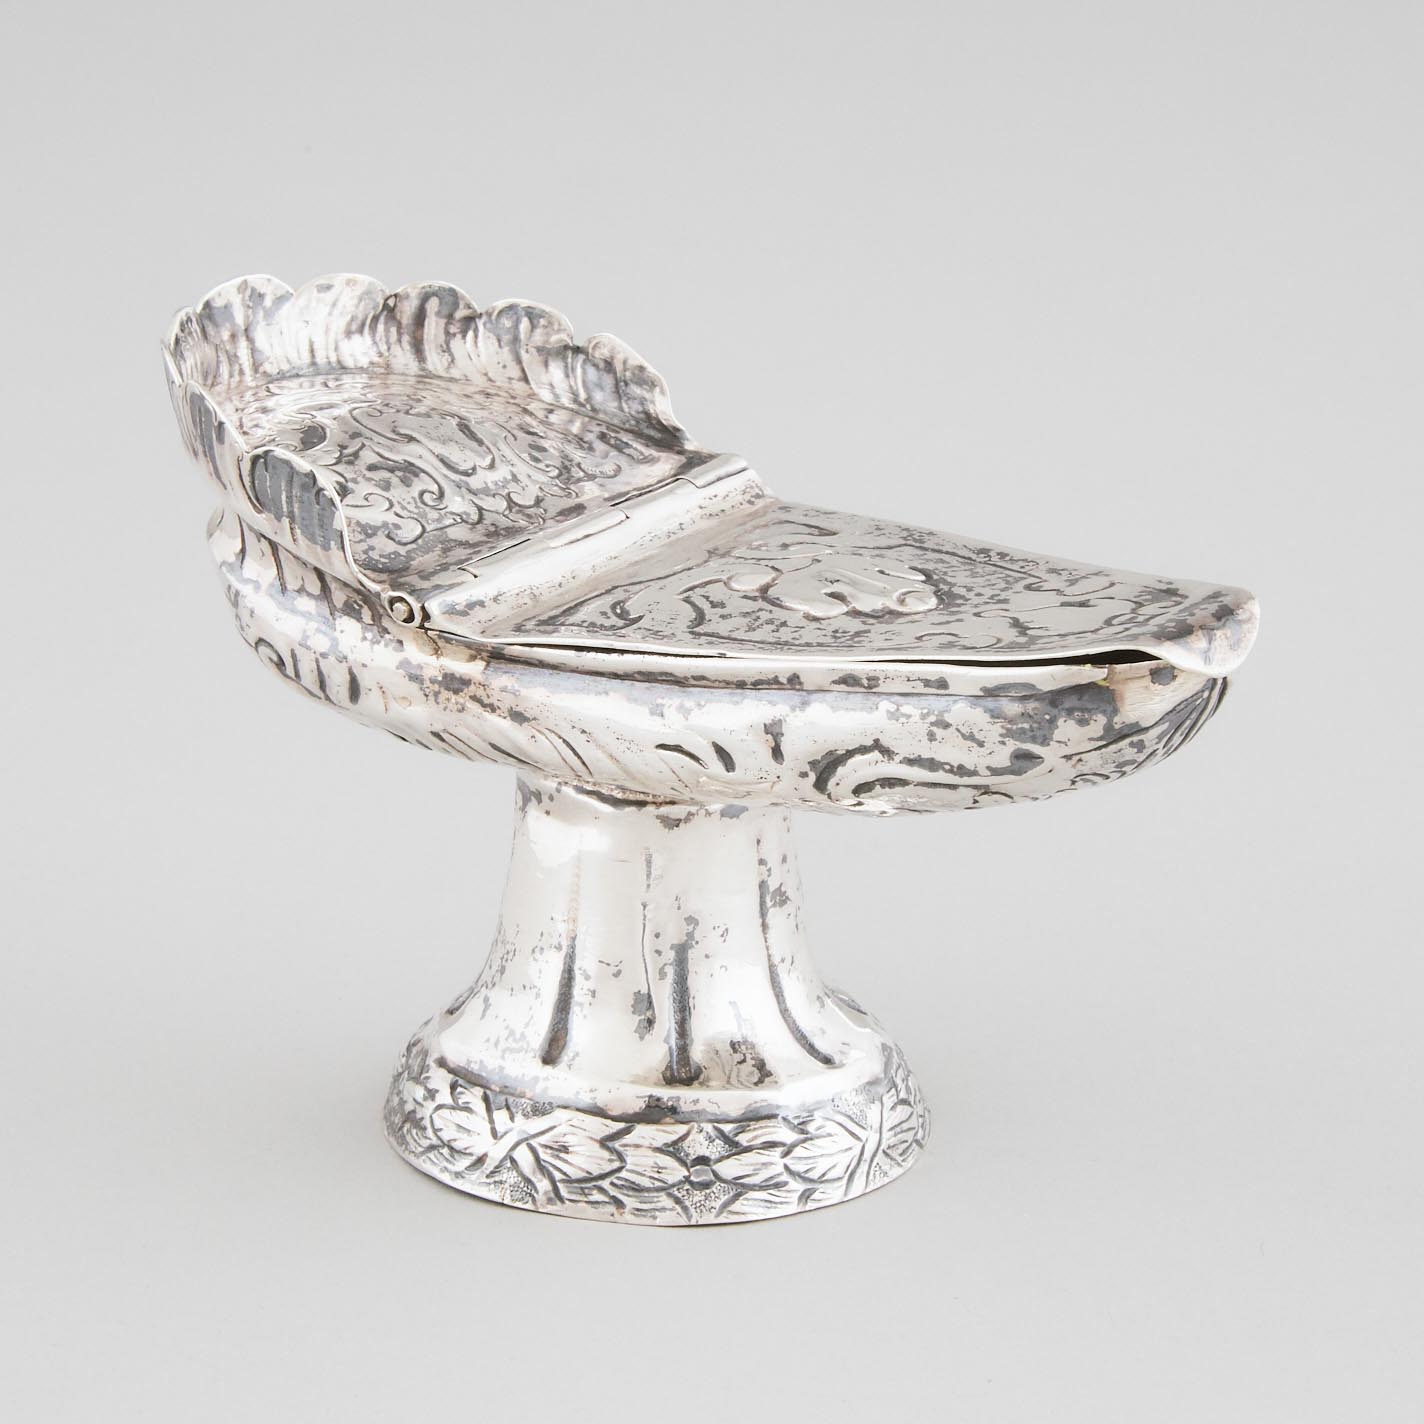 Spanish Colonial Silver Incense Boat, late 18th/19th century